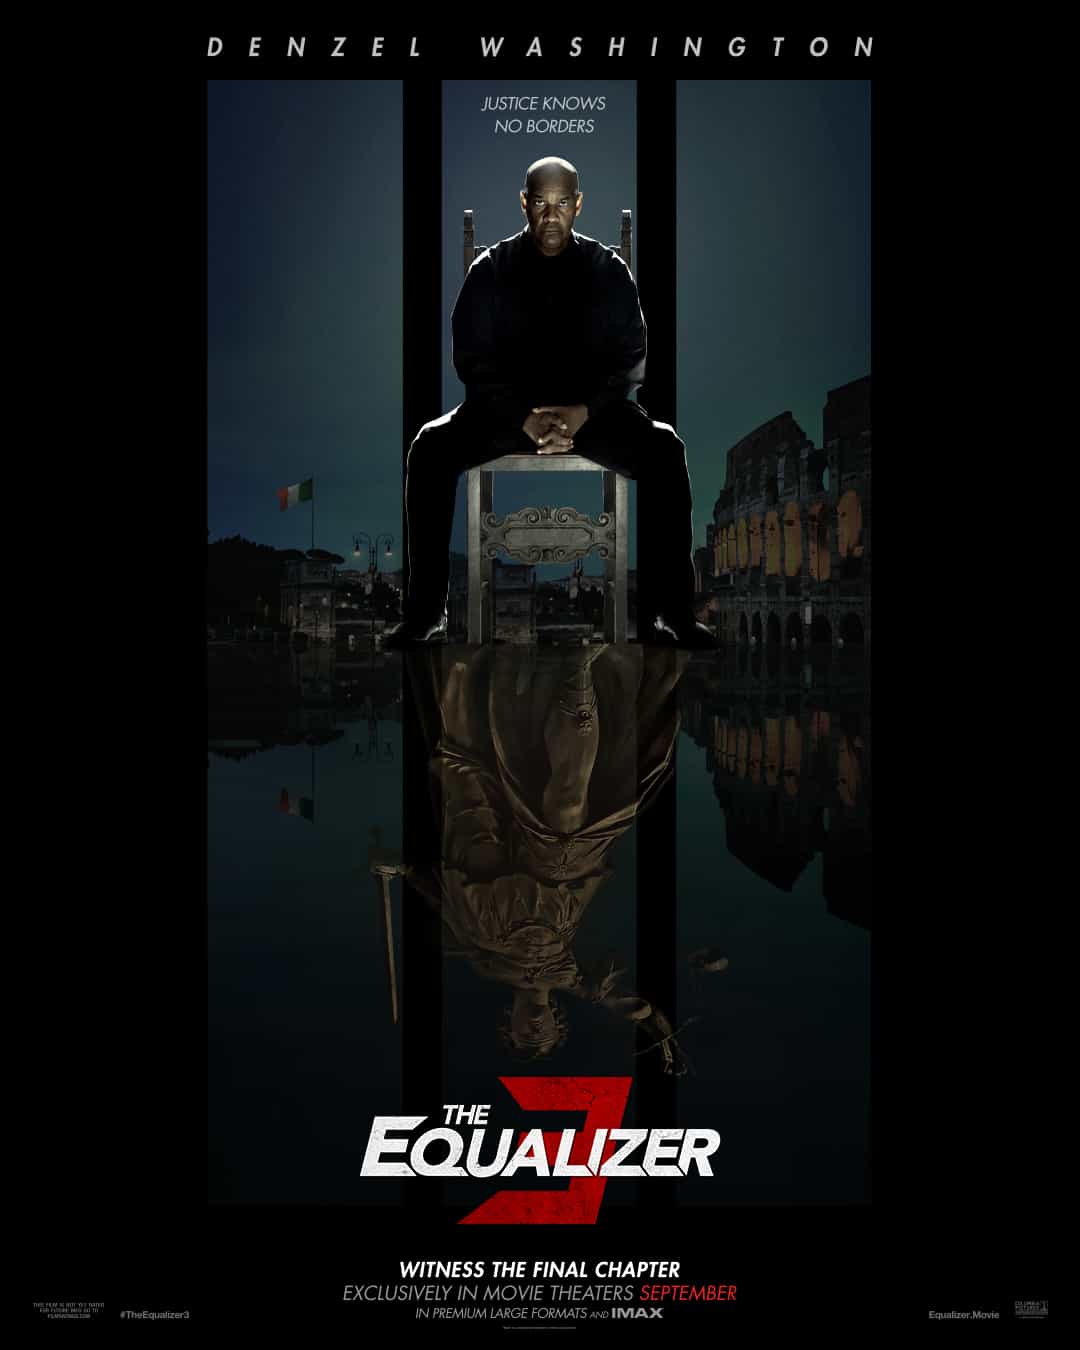 The Equalizer 3 is given a 15 age rating in the UK for strong violence, injury detail, threat, language